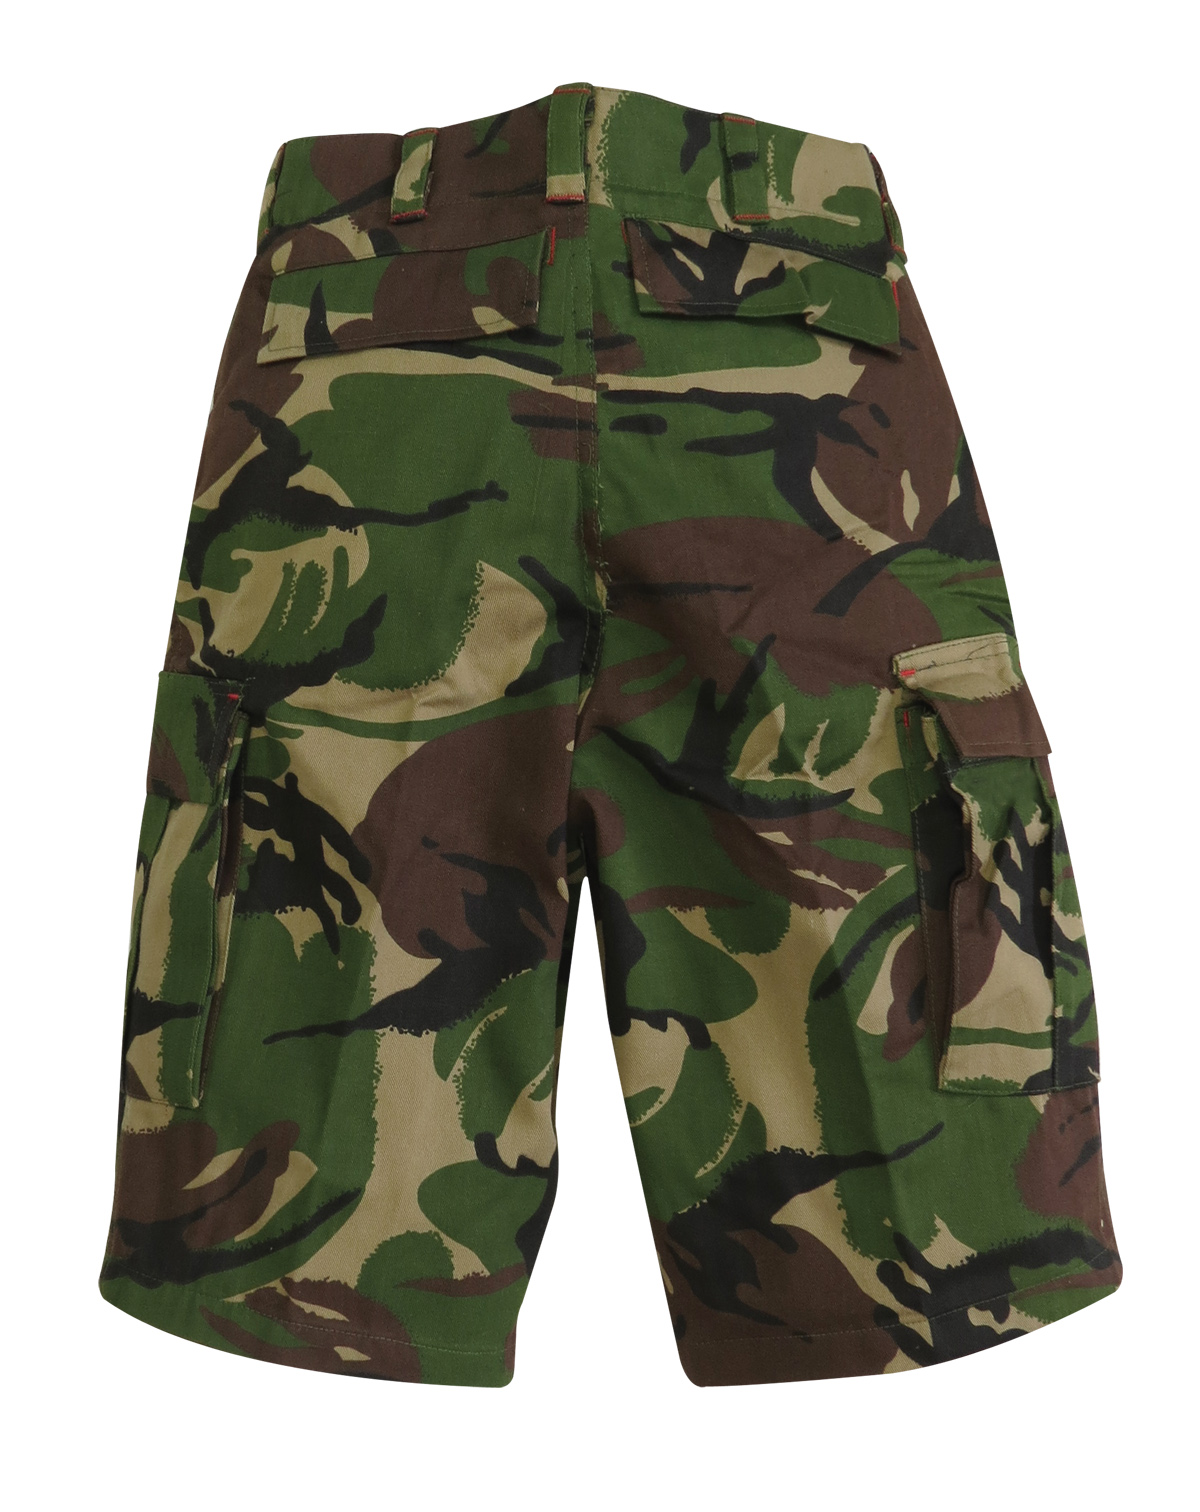 Kids Camo Shorts by Mean and Green